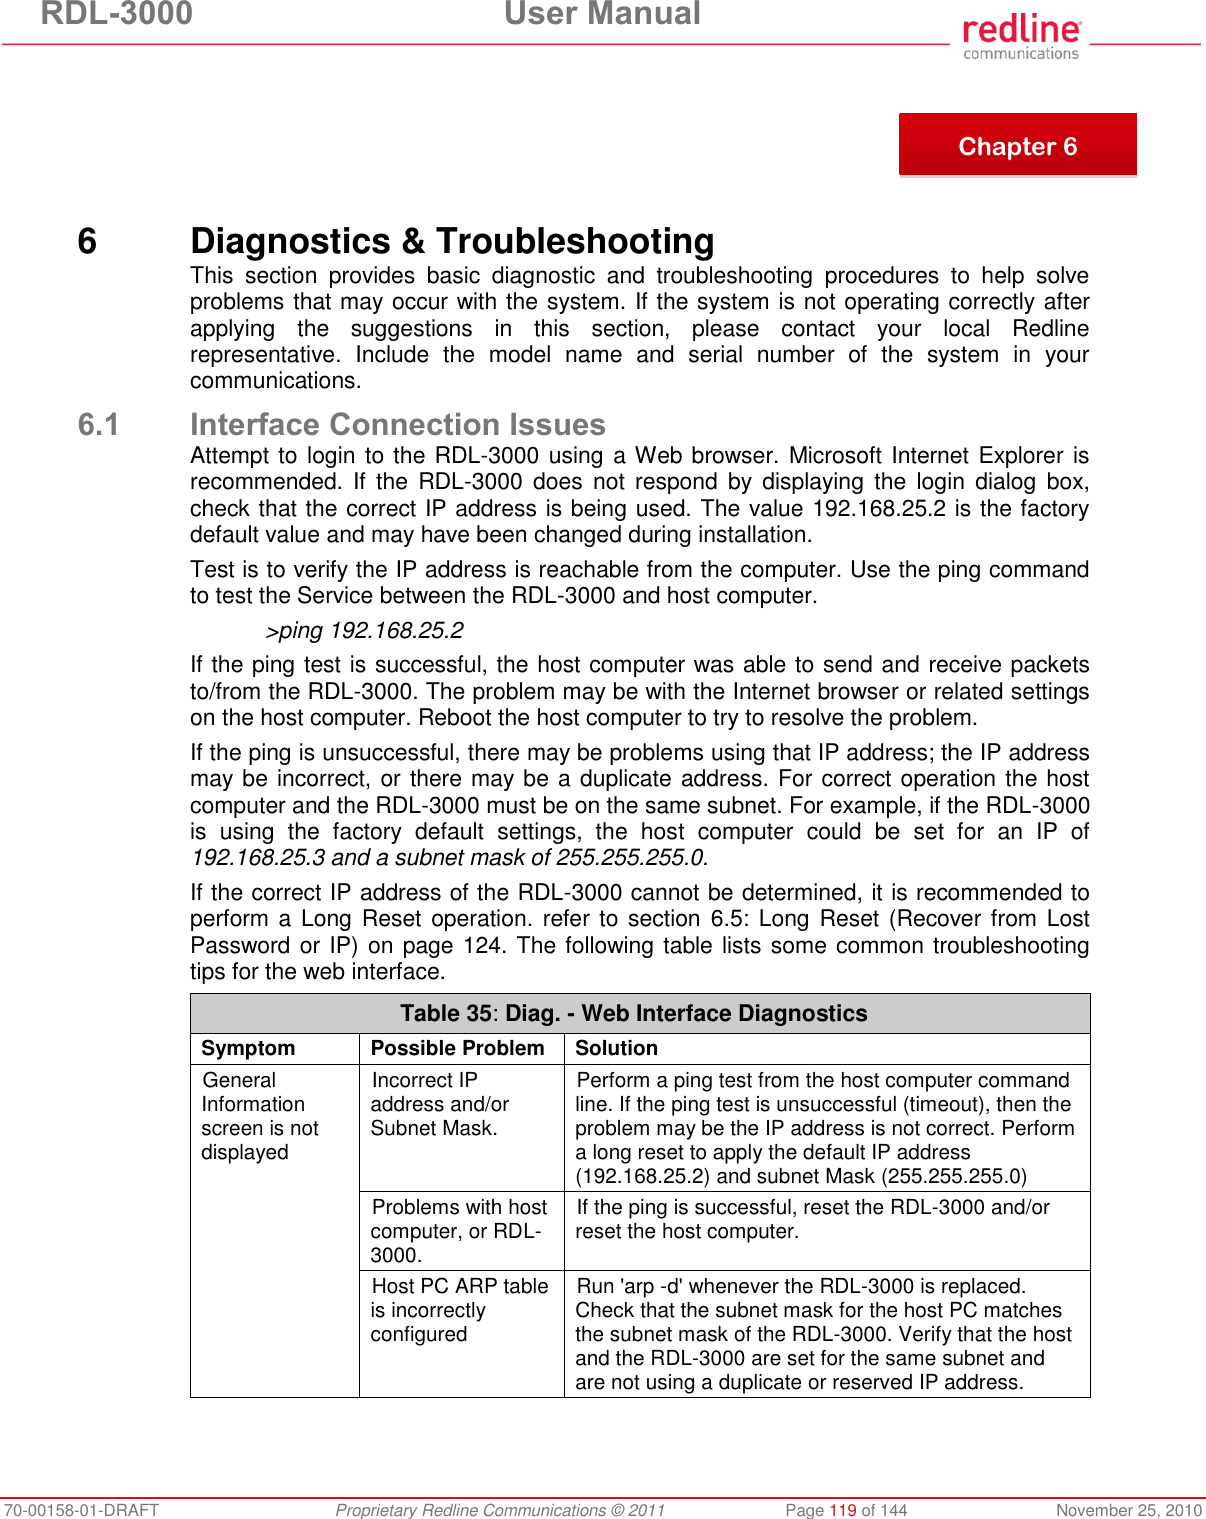 RDL-3000  User Manual 70-00158-01-DRAFT  Proprietary Redline Communications © 2011  Page 119 of 144  November 25, 2010       6  Diagnostics &amp; Troubleshooting This  section  provides  basic  diagnostic  and  troubleshooting  procedures  to  help  solve problems that may occur with the system. If the system is not operating correctly after applying  the  suggestions  in  this  section,  please  contact  your  local  Redline representative.  Include  the  model  name  and  serial  number  of  the  system  in  your communications. 6.1 Interface Connection Issues Attempt to login to the RDL-3000 using  a Web browser. Microsoft Internet Explorer is recommended.  If  the  RDL-3000 does  not  respond  by  displaying  the  login  dialog  box, check that the correct IP address is being used. The value 192.168.25.2 is the factory default value and may have been changed during installation. Test is to verify the IP address is reachable from the computer. Use the ping command to test the Service between the RDL-3000 and host computer. &gt;ping 192.168.25.2 If the ping test is successful, the host computer was able to send and receive packets to/from the RDL-3000. The problem may be with the Internet browser or related settings on the host computer. Reboot the host computer to try to resolve the problem. If the ping is unsuccessful, there may be problems using that IP address; the IP address may be incorrect, or there may be a duplicate address. For correct operation the host computer and the RDL-3000 must be on the same subnet. For example, if the RDL-3000 is  using  the  factory  default  settings,  the  host  computer  could  be  set  for  an  IP  of 192.168.25.3 and a subnet mask of 255.255.255.0. If the correct IP address of the RDL-3000 cannot be determined, it is recommended to perform a  Long Reset operation. refer to section  6.5:  Long Reset (Recover from Lost Password or IP) on page 124. The following table lists some common troubleshooting tips for the web interface. Table 35: Diag. - Web Interface Diagnostics Symptom Possible Problem Solution General Information screen is not displayed Incorrect IP address and/or Subnet Mask. Perform a ping test from the host computer command line. If the ping test is unsuccessful (timeout), then the problem may be the IP address is not correct. Perform a long reset to apply the default IP address (192.168.25.2) and subnet Mask (255.255.255.0) Problems with host computer, or RDL-3000. If the ping is successful, reset the RDL-3000 and/or reset the host computer. Host PC ARP table is incorrectly configured Run &apos;arp -d&apos; whenever the RDL-3000 is replaced. Check that the subnet mask for the host PC matches the subnet mask of the RDL-3000. Verify that the host and the RDL-3000 are set for the same subnet and are not using a duplicate or reserved IP address.   Chapter 6 